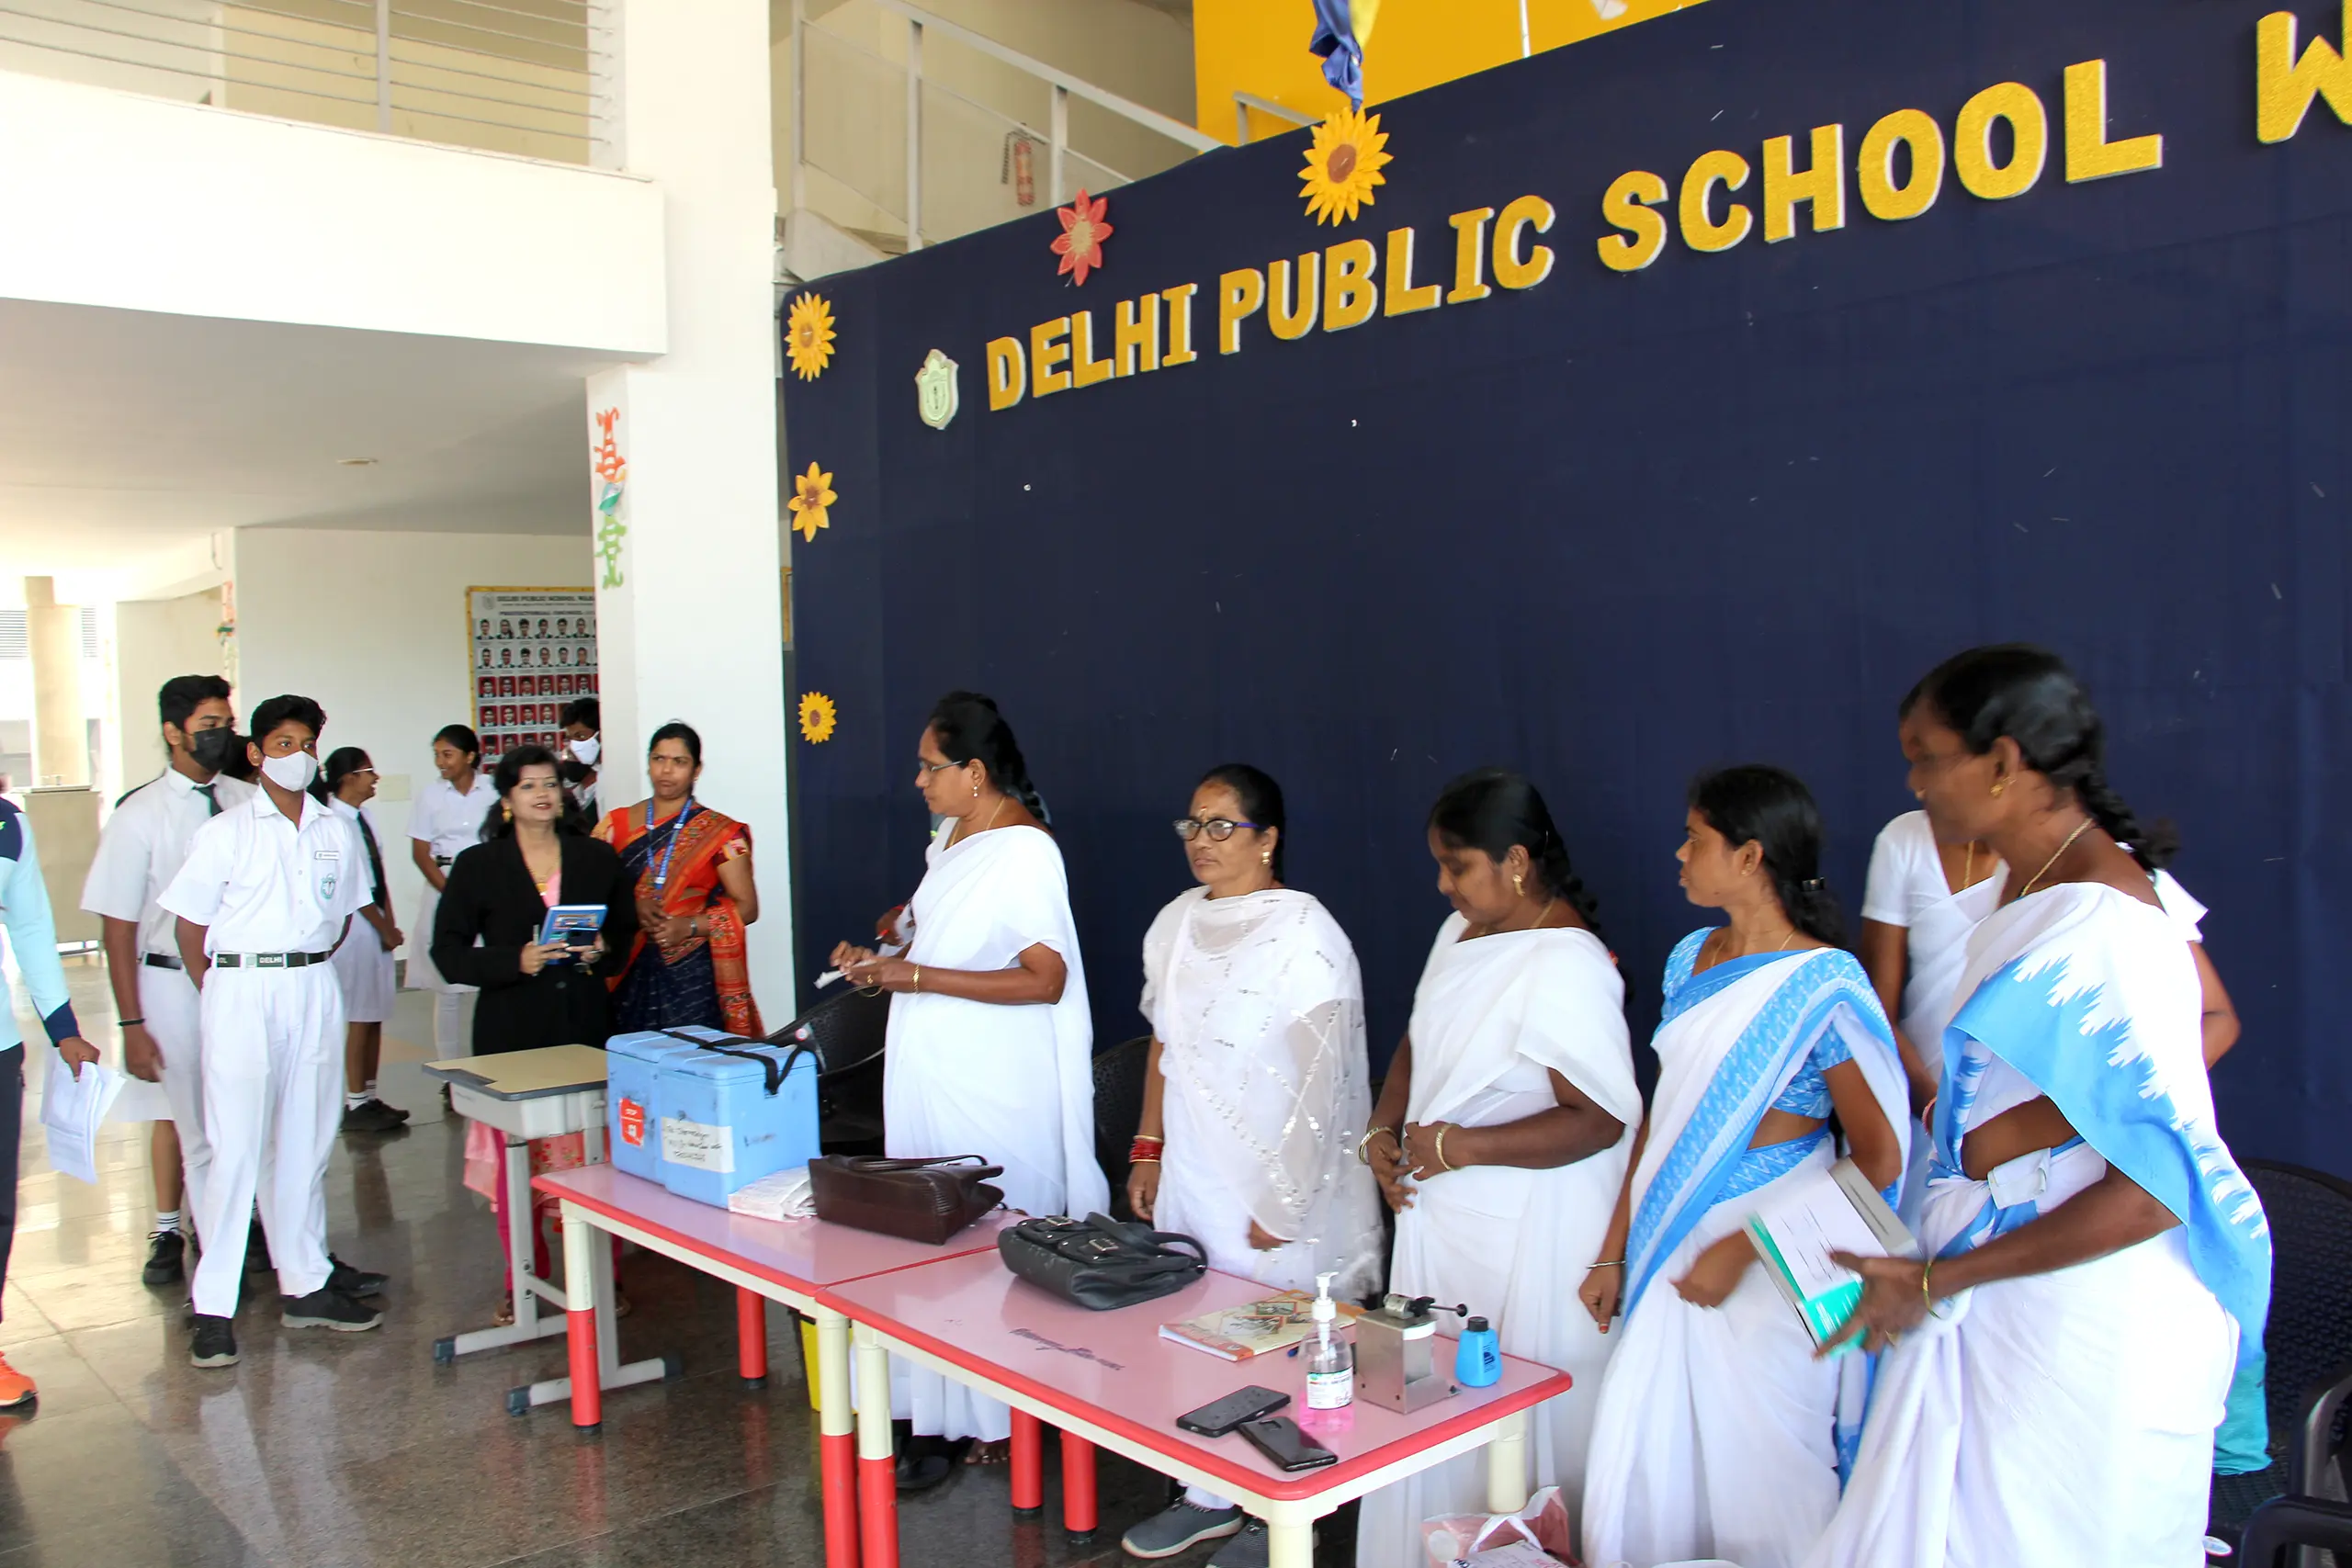 TD Vaccination Drive was organised at activity hall of DPS Warangal for students to get vaccinated in the presence of teachers.